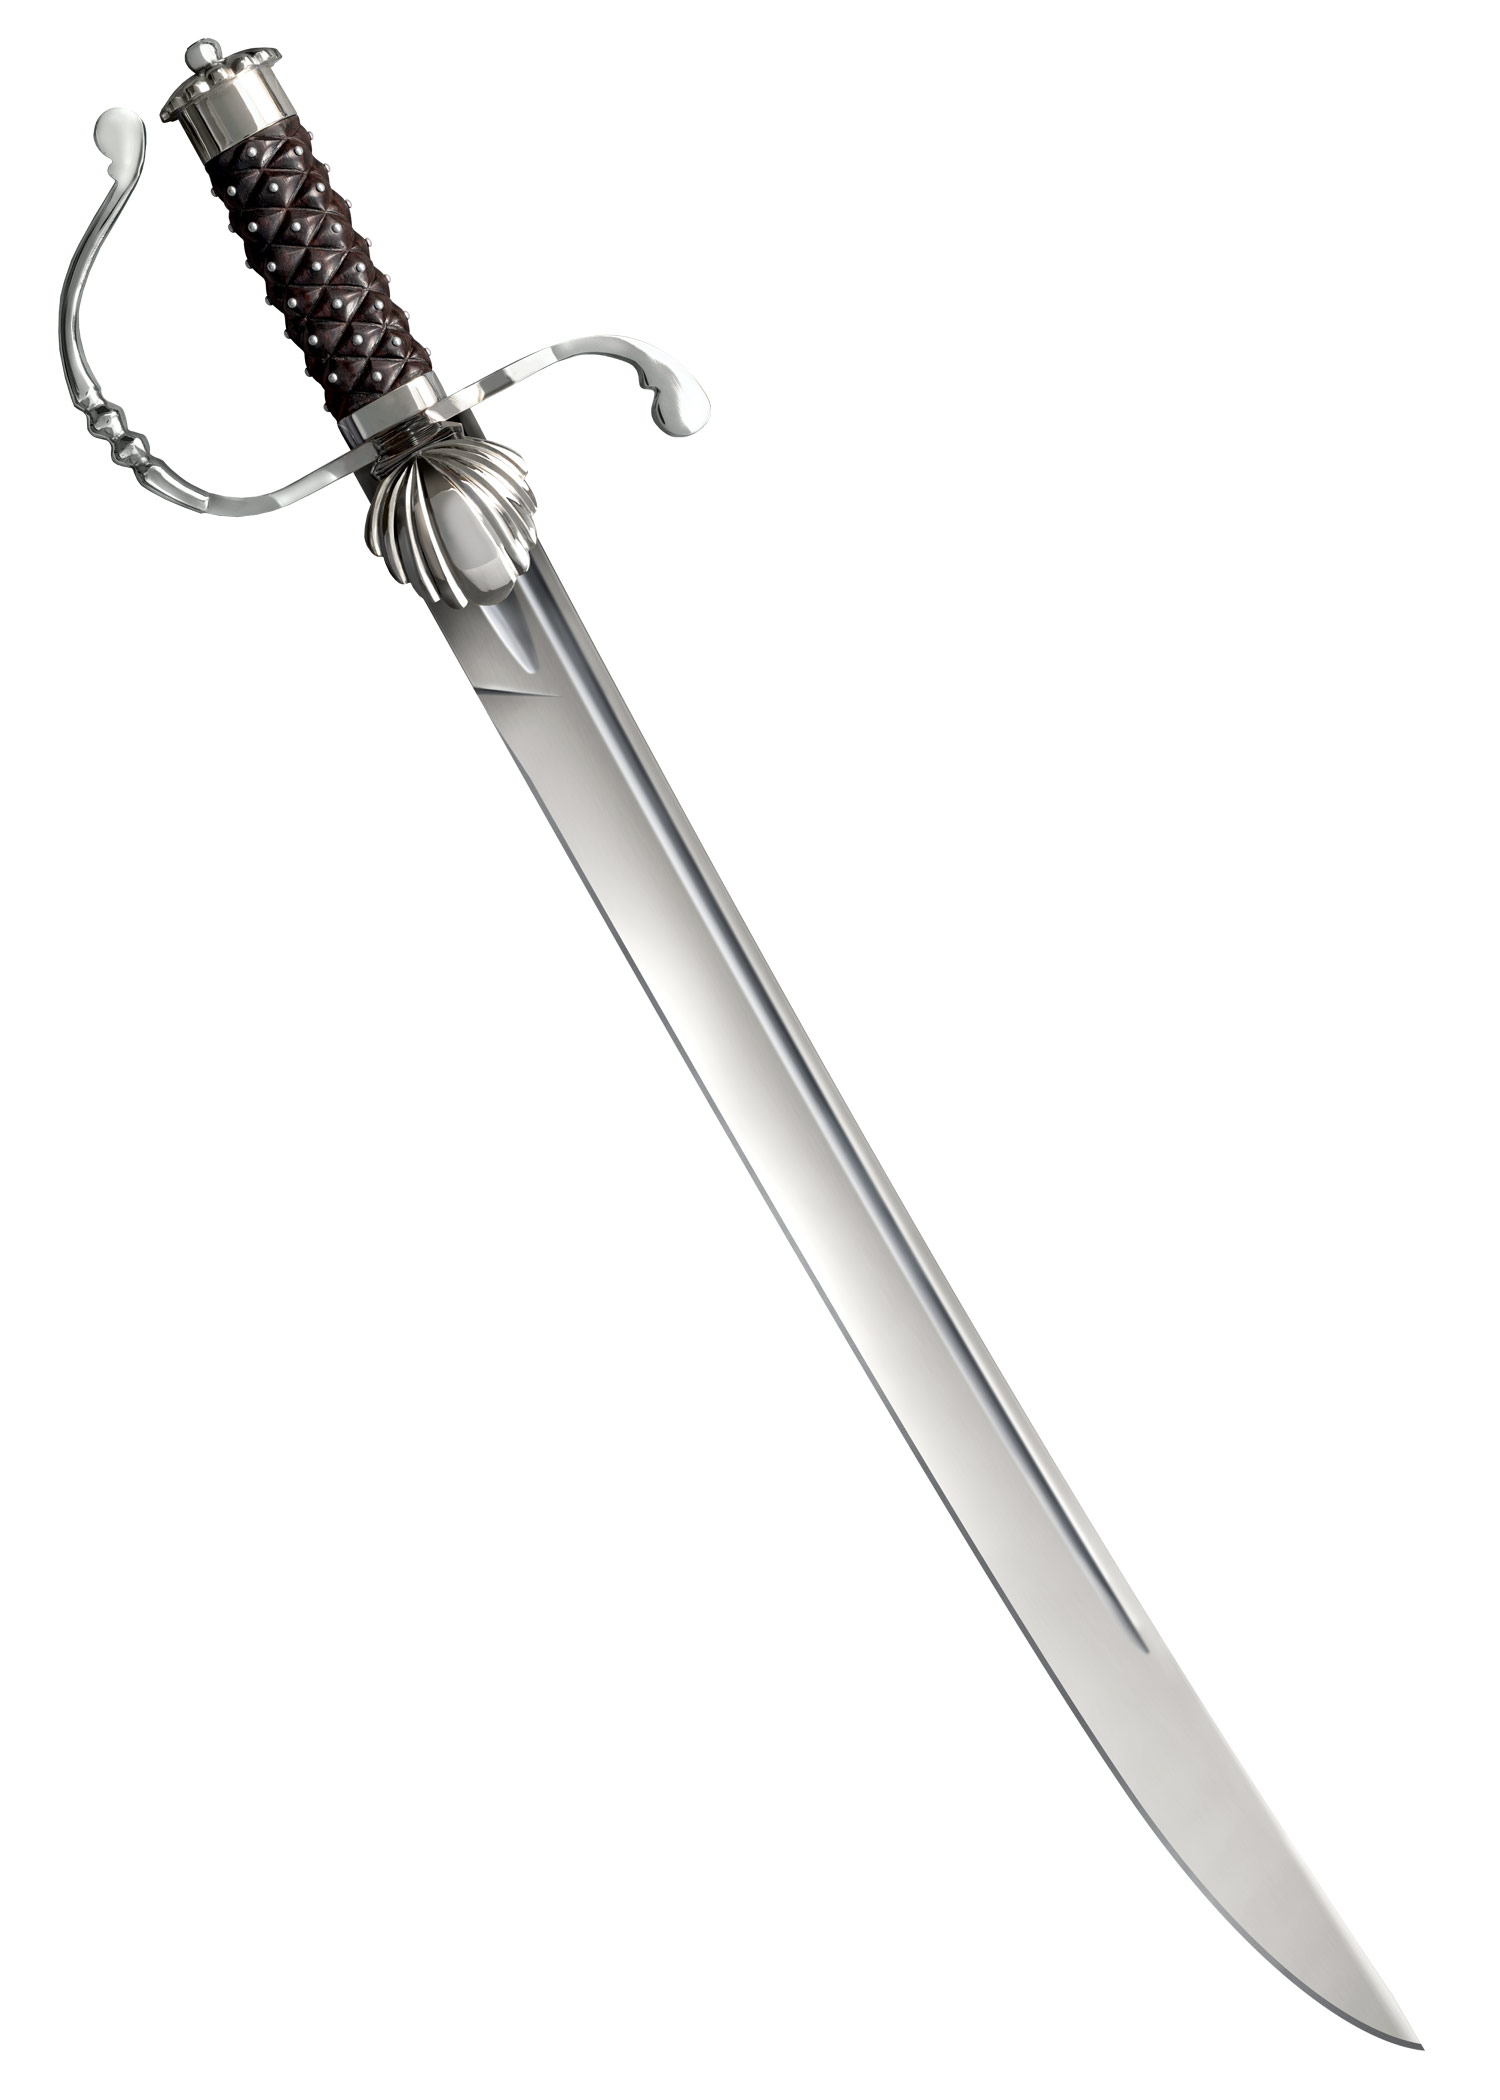 Cold Steel 29" 1055hc Hunting Sword with scabbard 88clq 